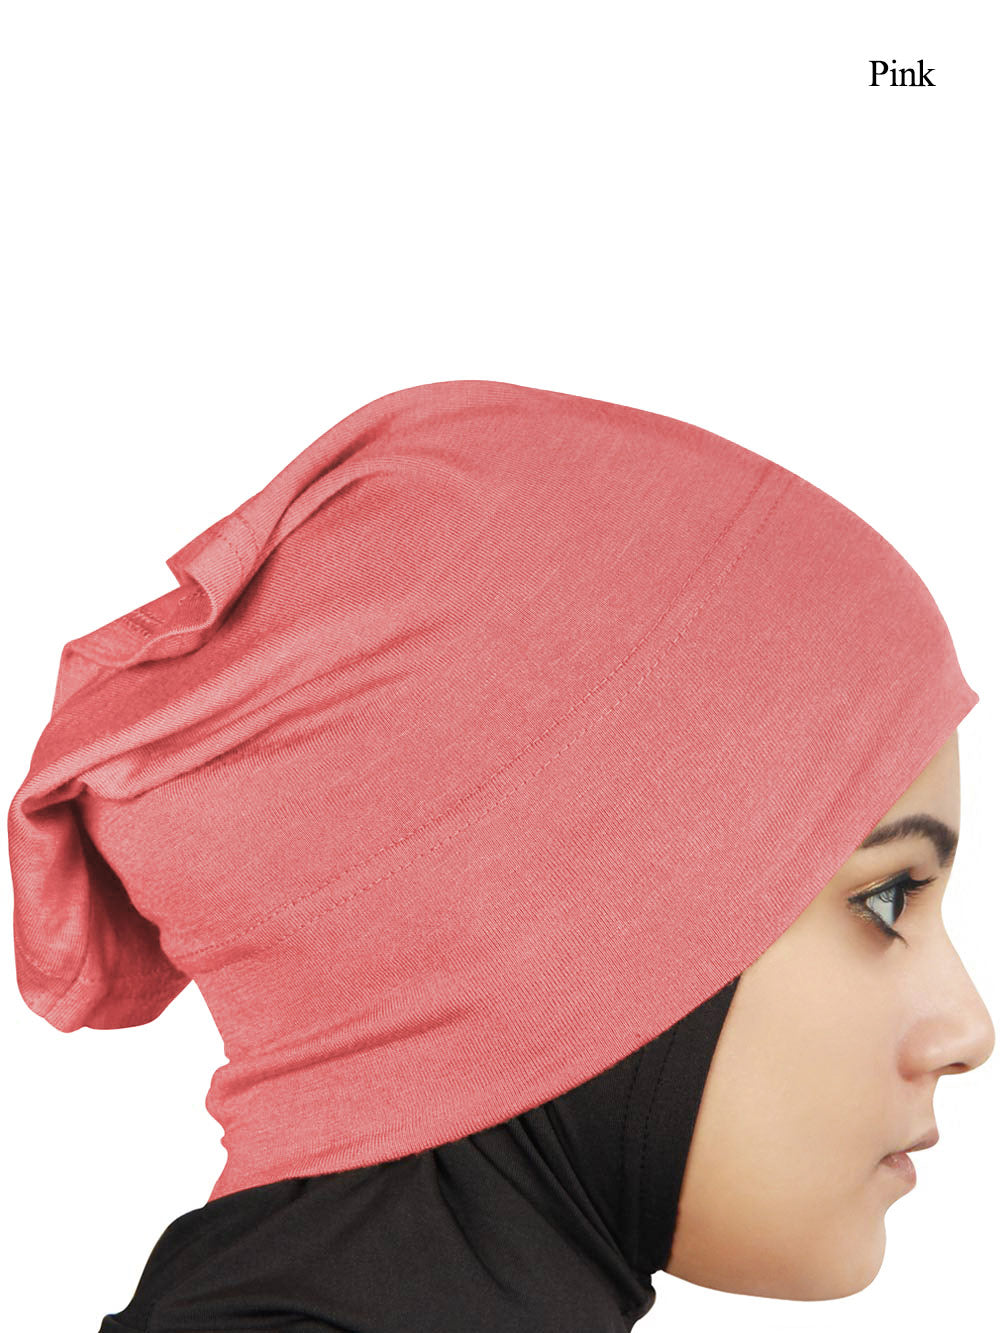 Two Piece Instant Pink Viscose Jersey Hijab